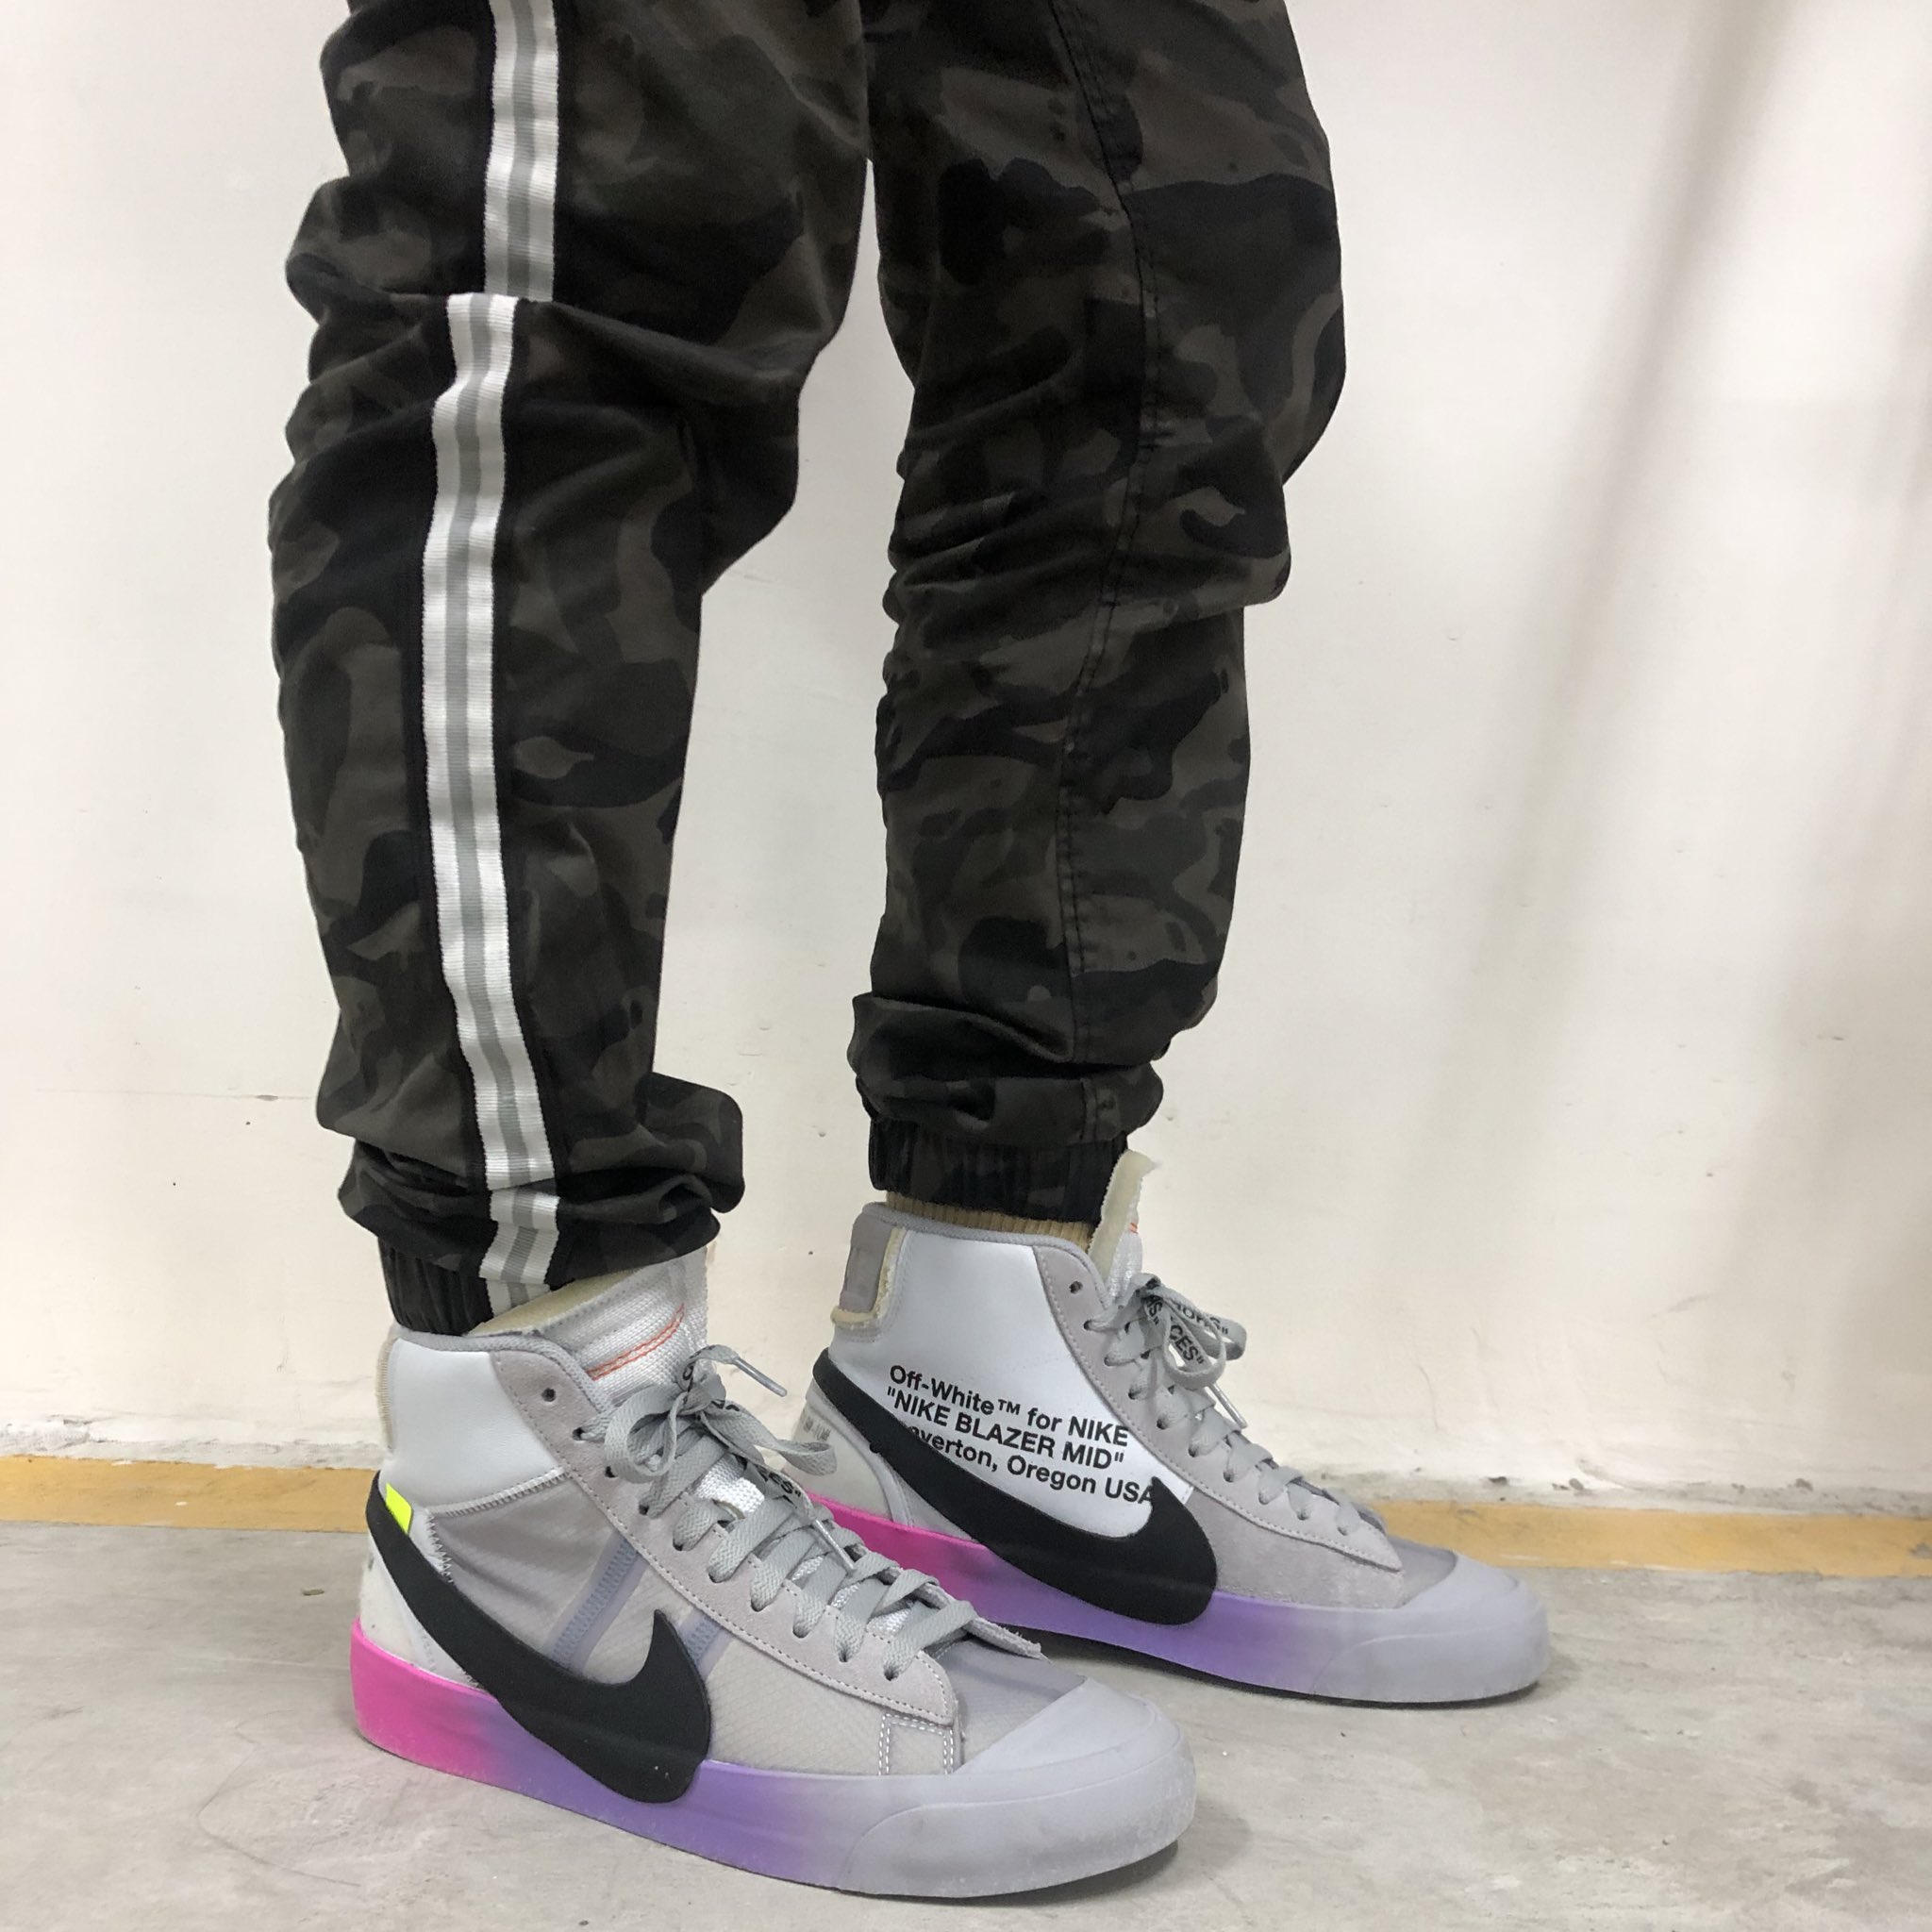 Hairil Potter on Twitter: "By far the best pick up for my 2018 collection. Nike Blazer Mid x Off White “Serena Williams” hands down Sneaker of the year Fell in love